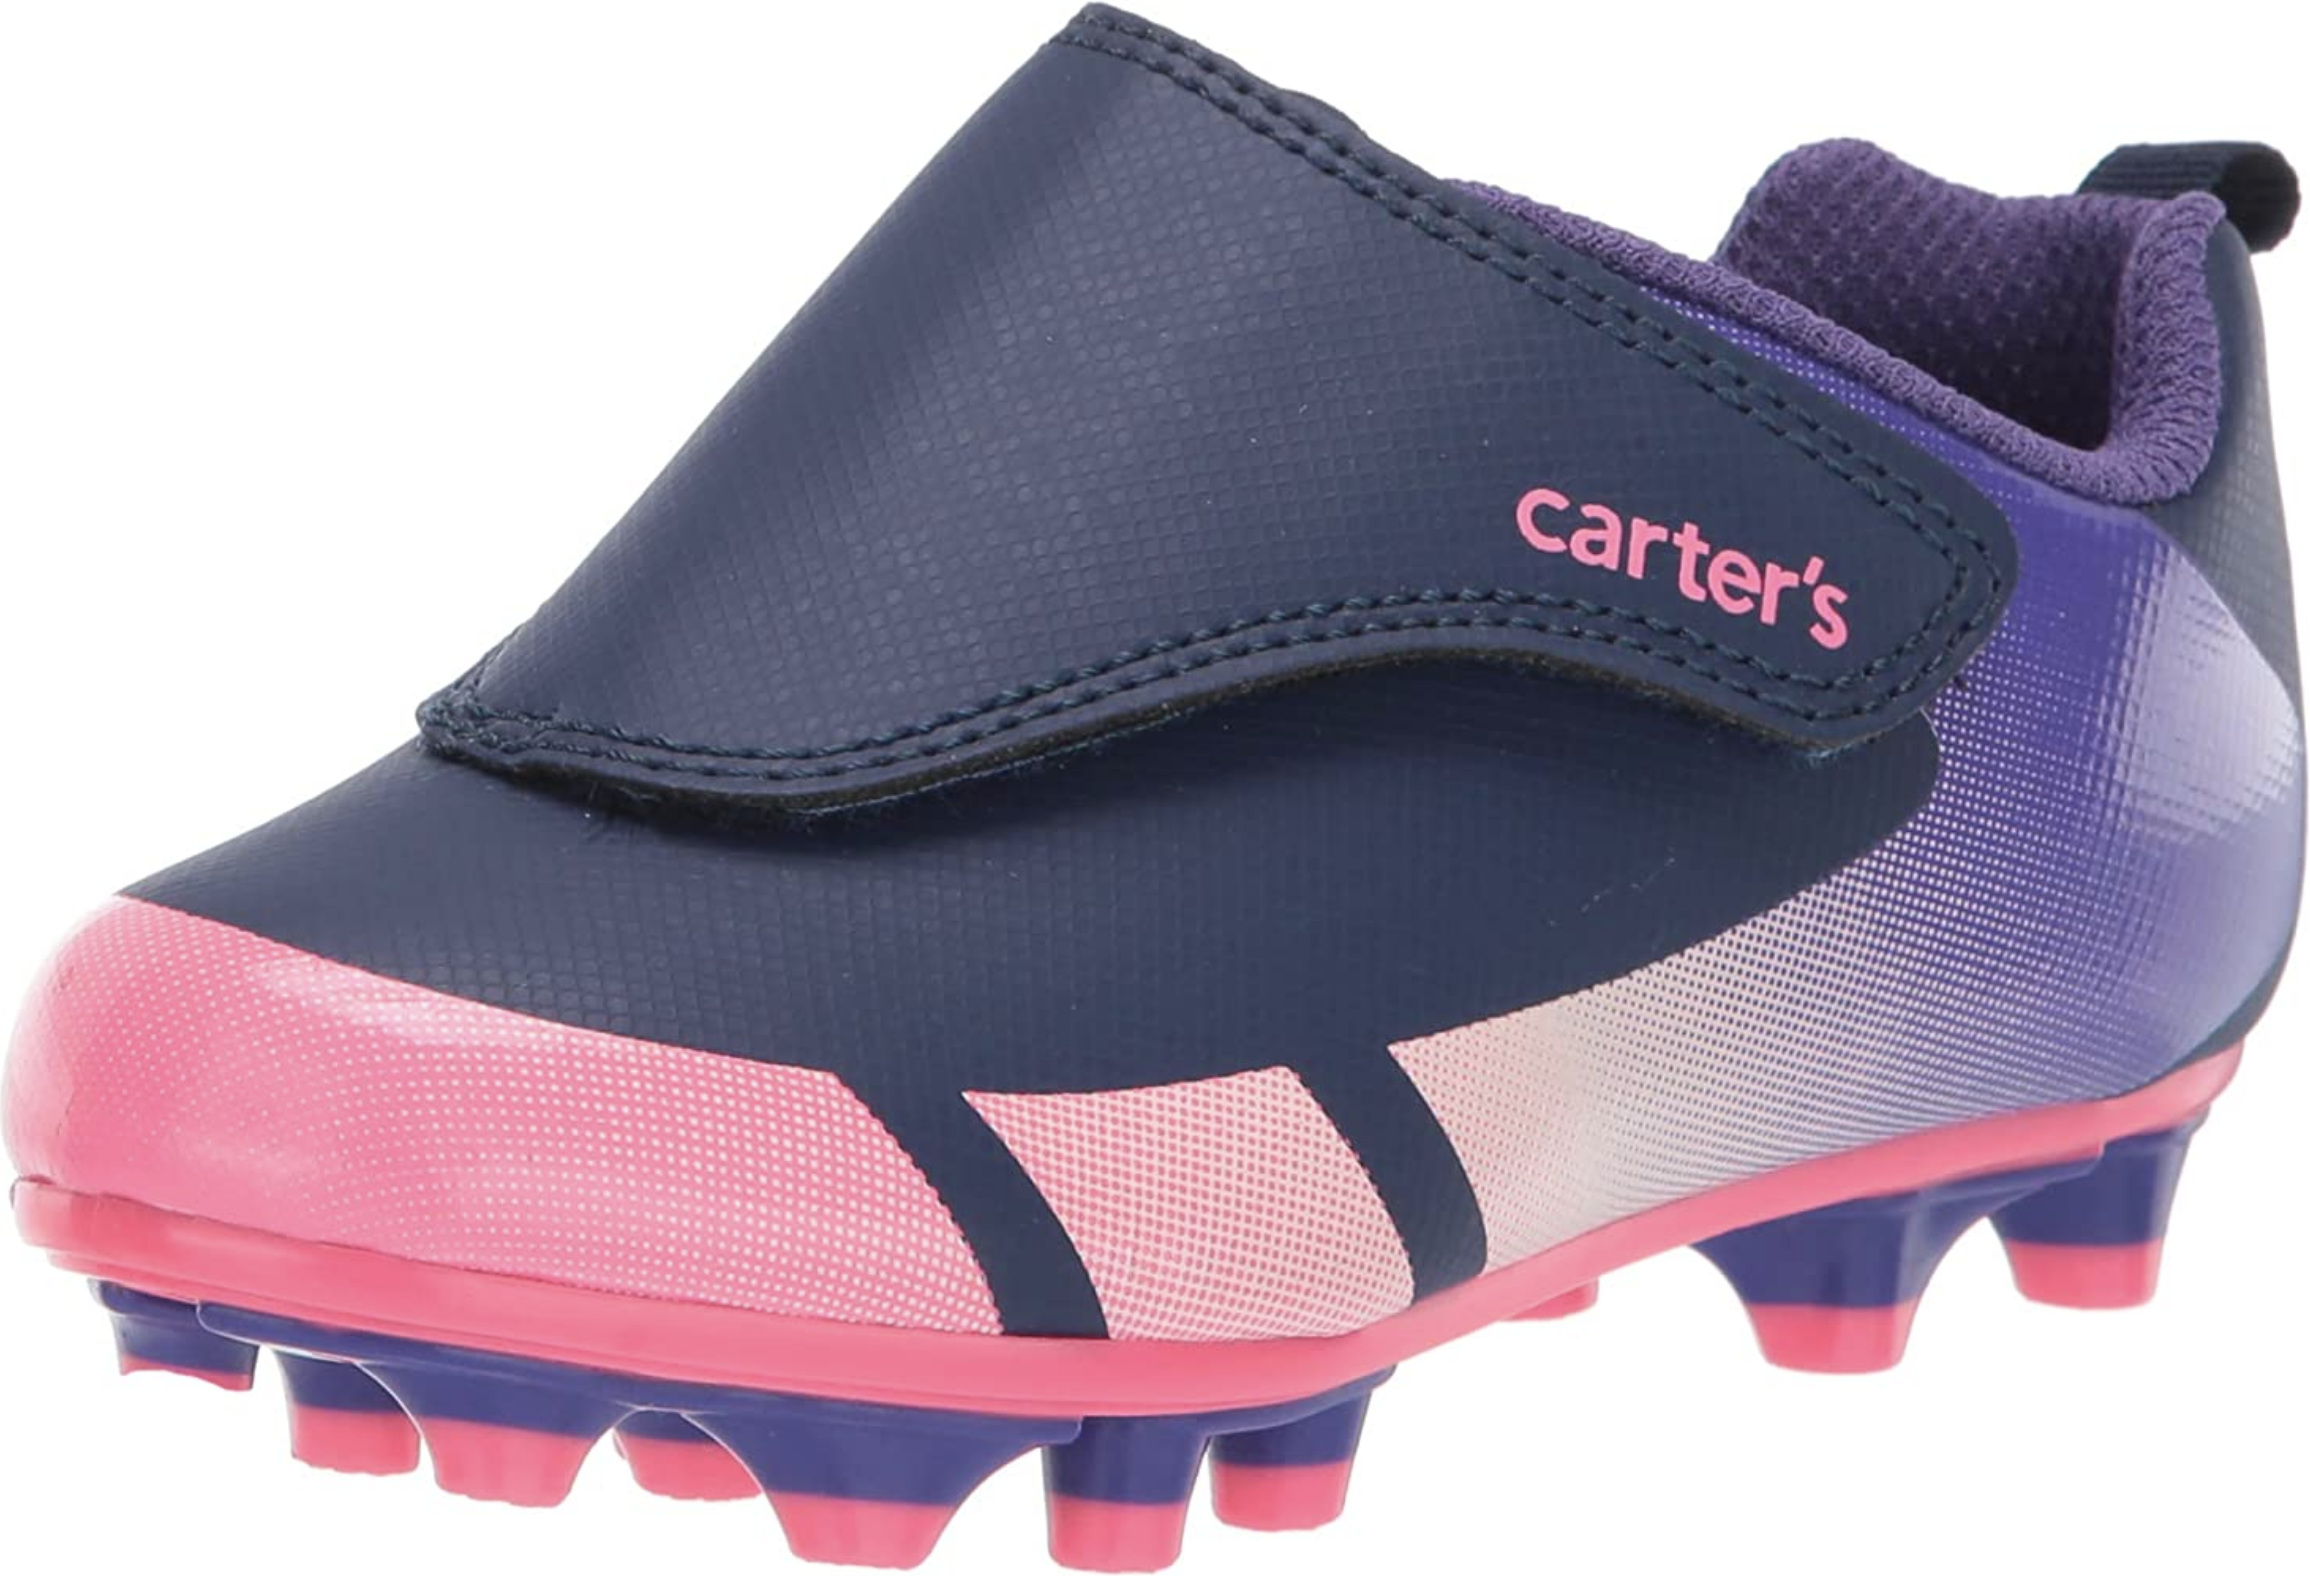 Best toddler soccer cleats: 7 top choices and buying guide